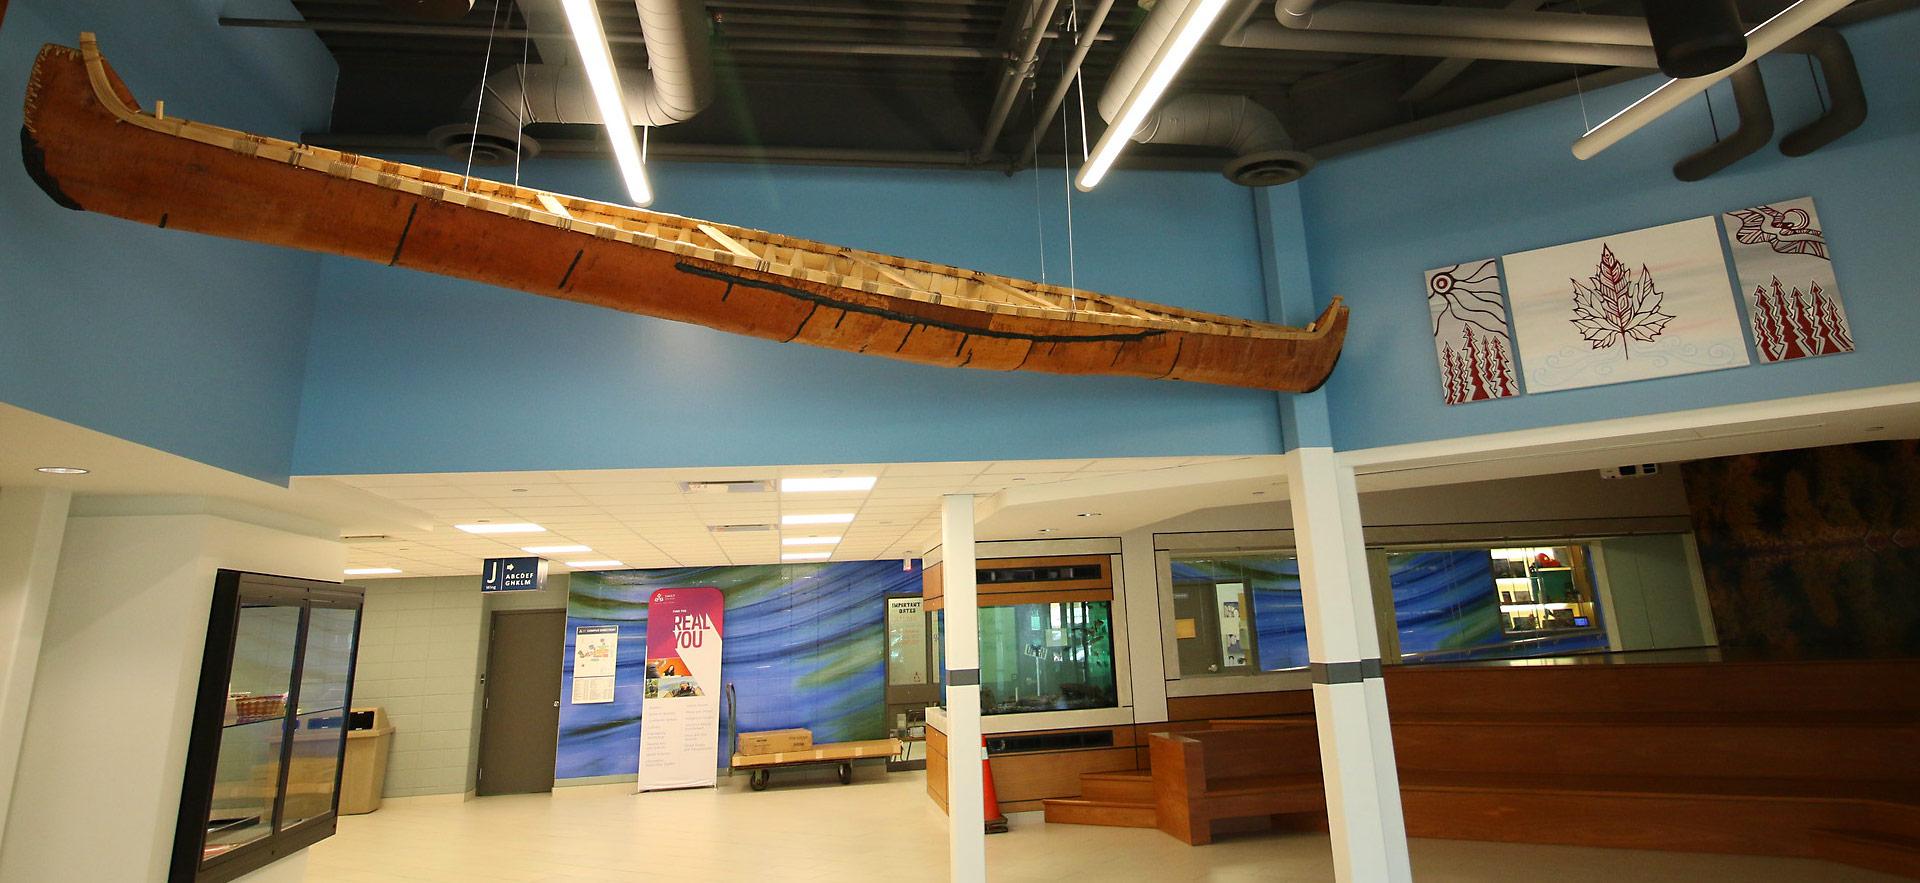 indigenous crafted canoe suspended in hall entry